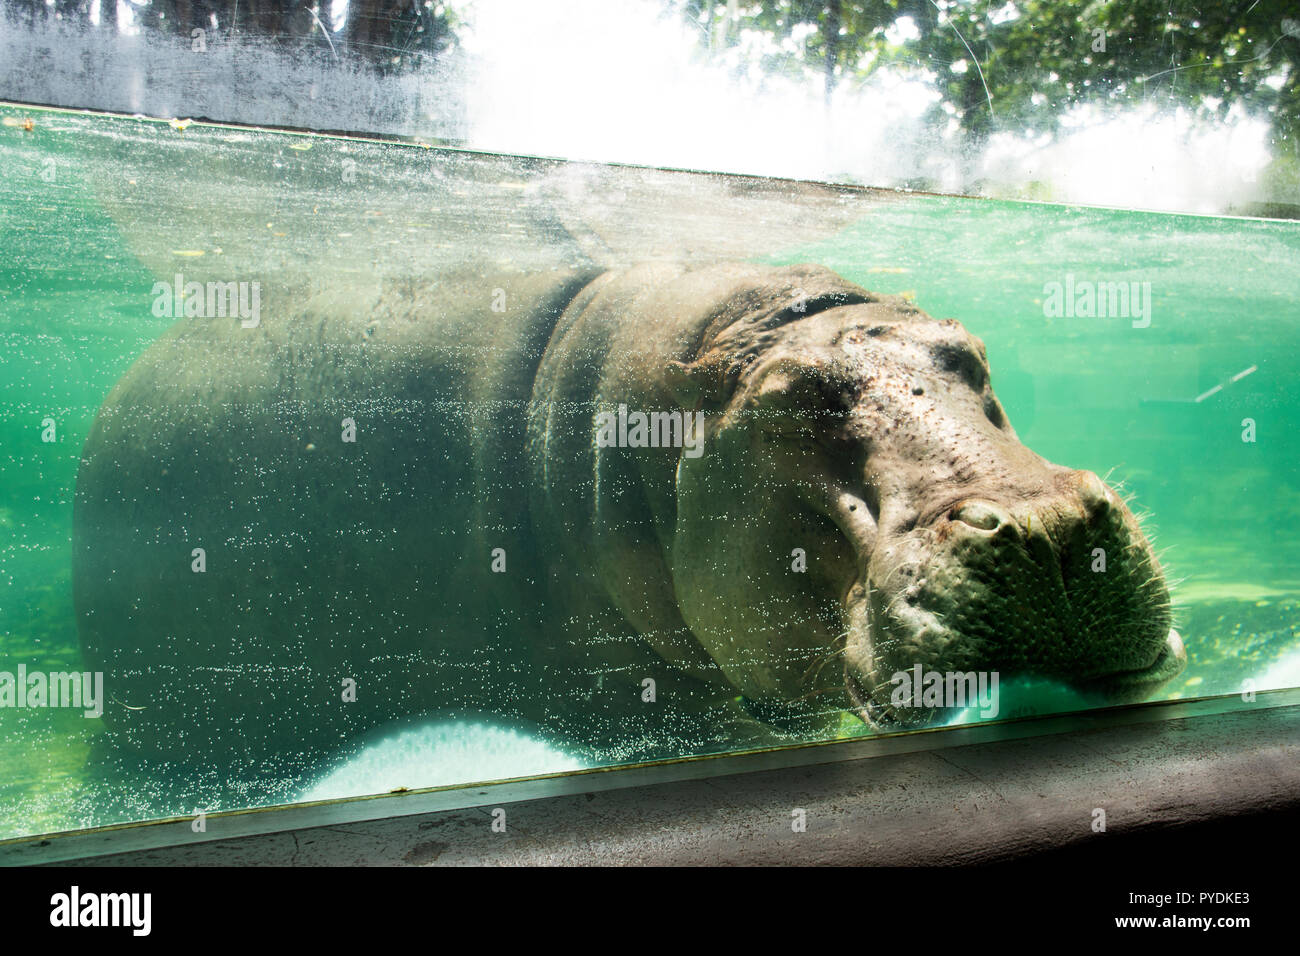 Hippopotamus amphibius or hippo sleeping in water pond and cage at public park in Bangkok, Thailand for Thai people and foreigner travelers walking vi Stock Photo